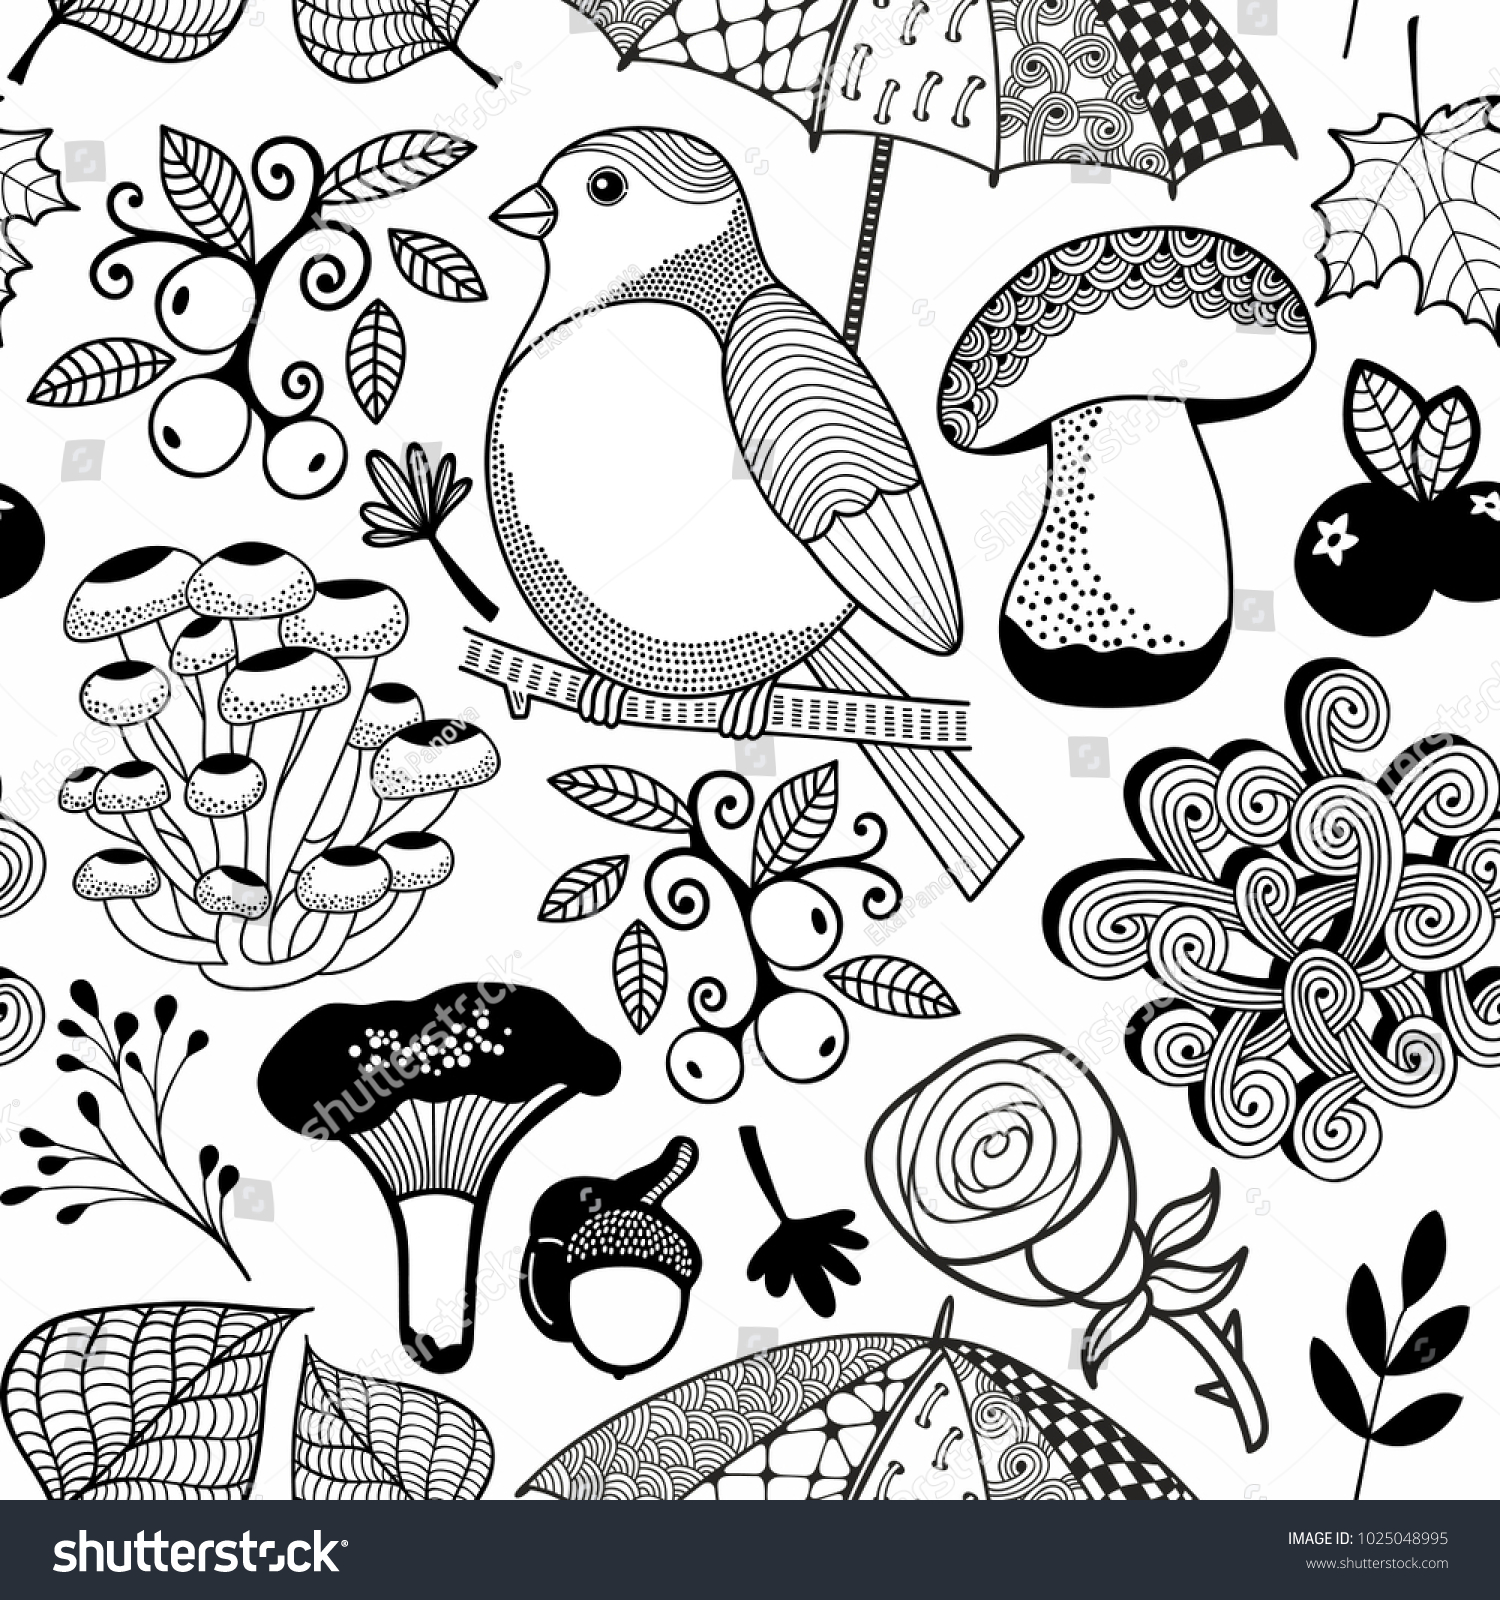 Download Black White Endless Wallpaper Coloring Book Stock Vector Royalty Free 1025048995